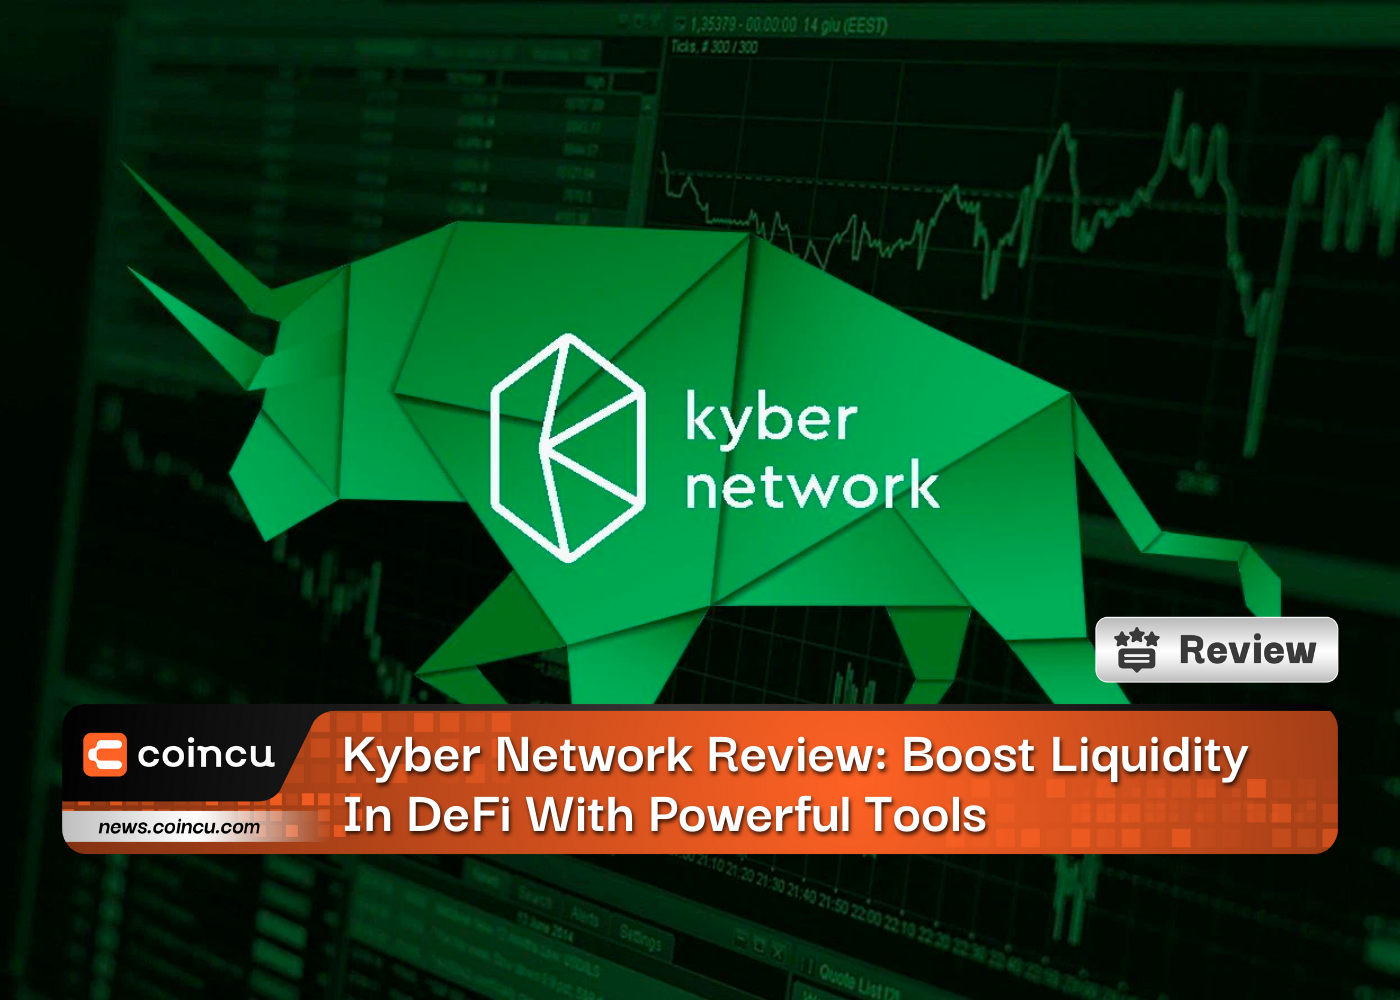 Kyber Network Review: Boost Liquidity In DeFi With Powerful Tools